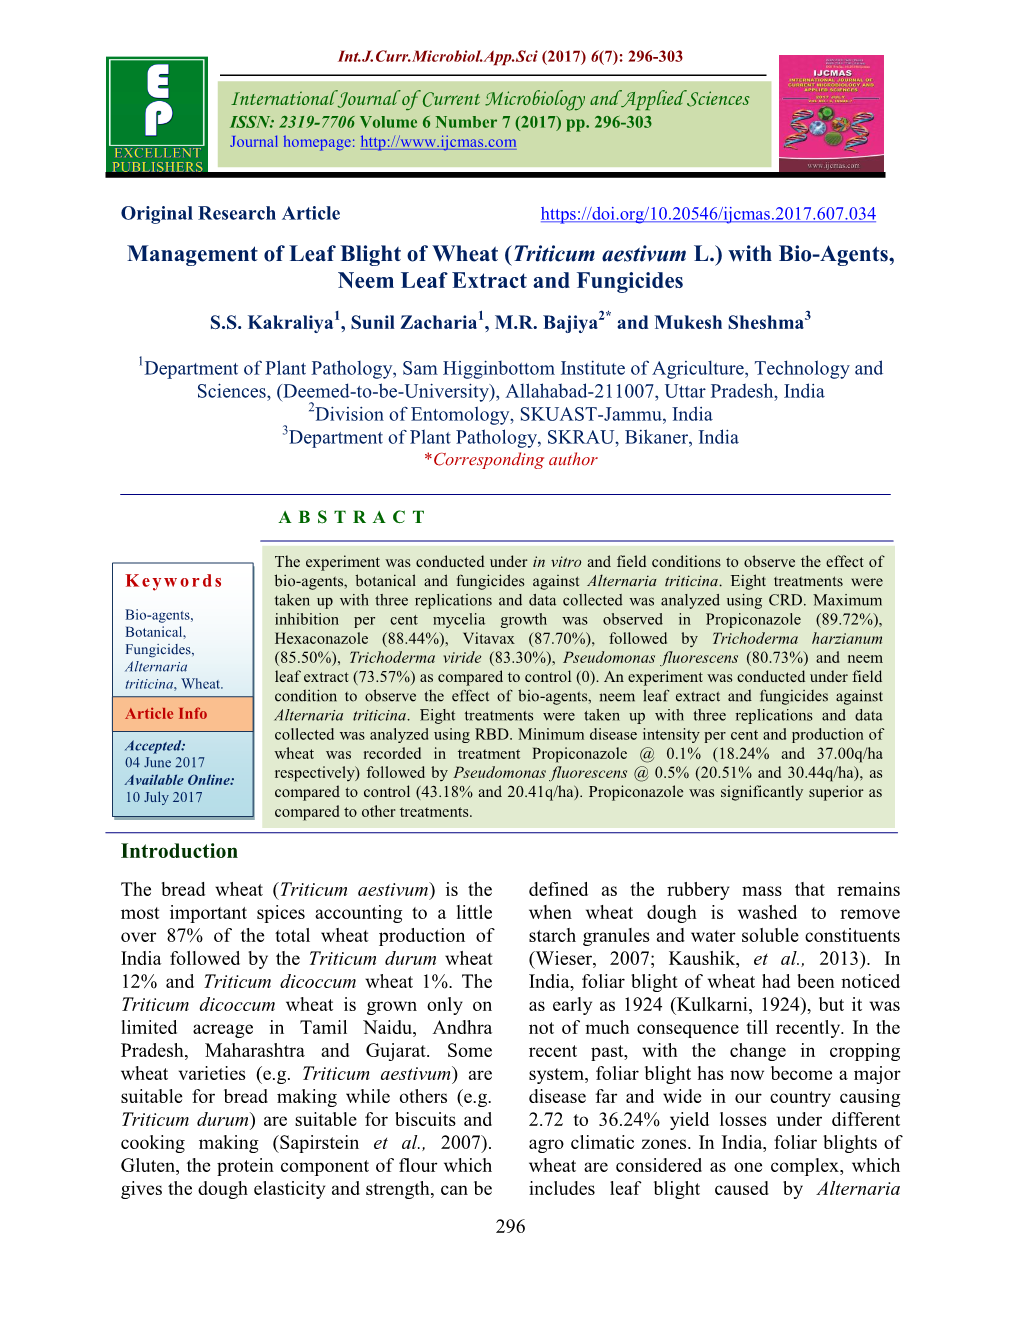 Management of Leaf Blight of Wheat (Triticum Aestivum L.) with Bio-Agents, Neem Leaf Extract and Fungicides